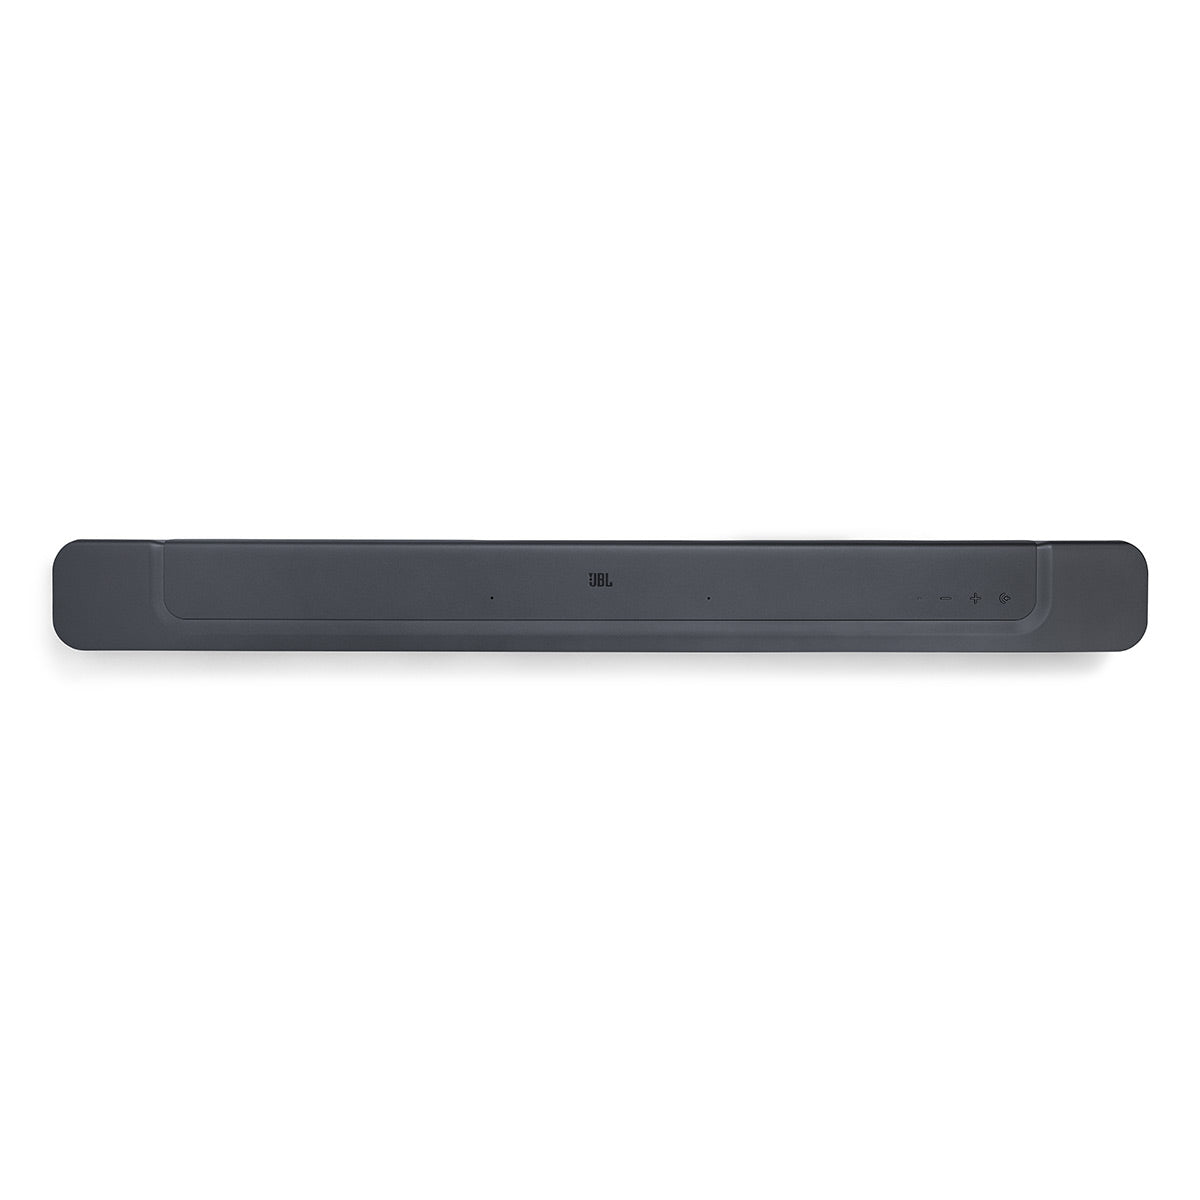 JBL Bar 500 5.1 Channel Soundbar and 10" Wireless Subwoofer with Multibeam Technology